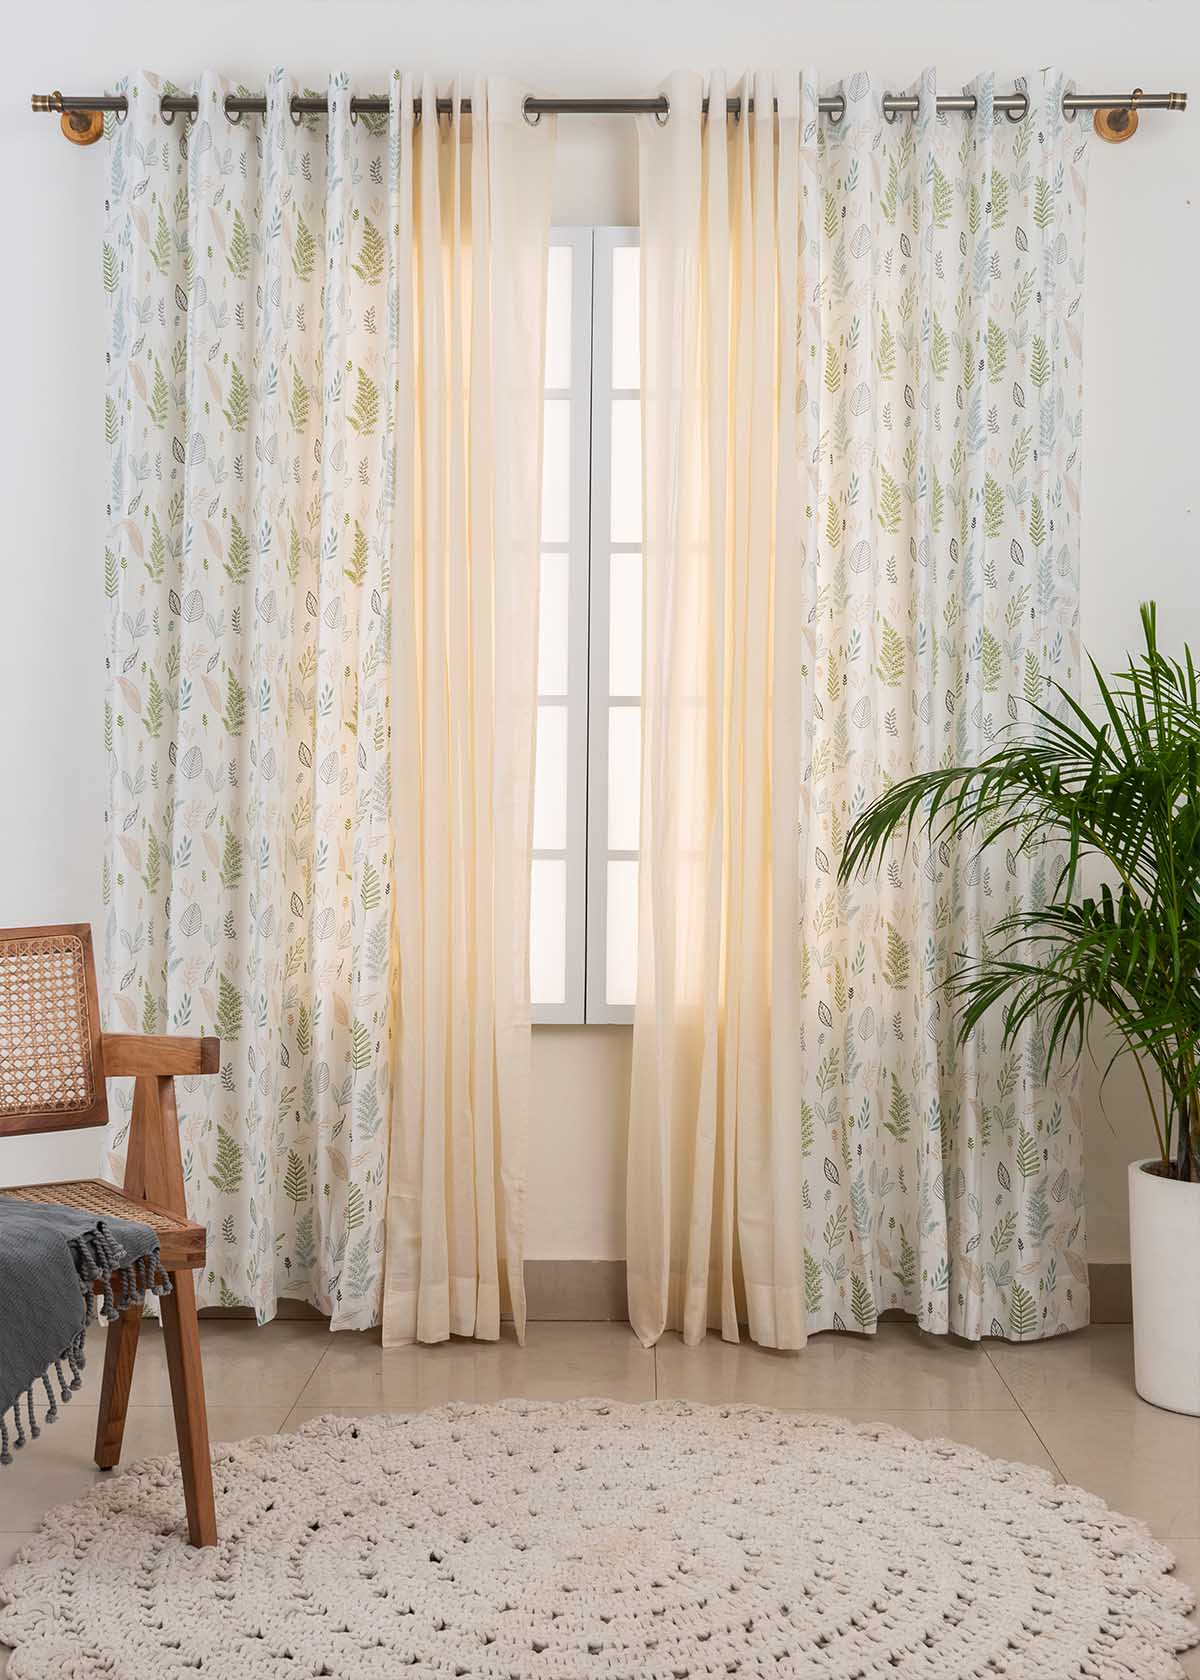 Rustling Leaves, Cream Sheer Set Of 4 Combo Cotton Curtain - Green And Cream